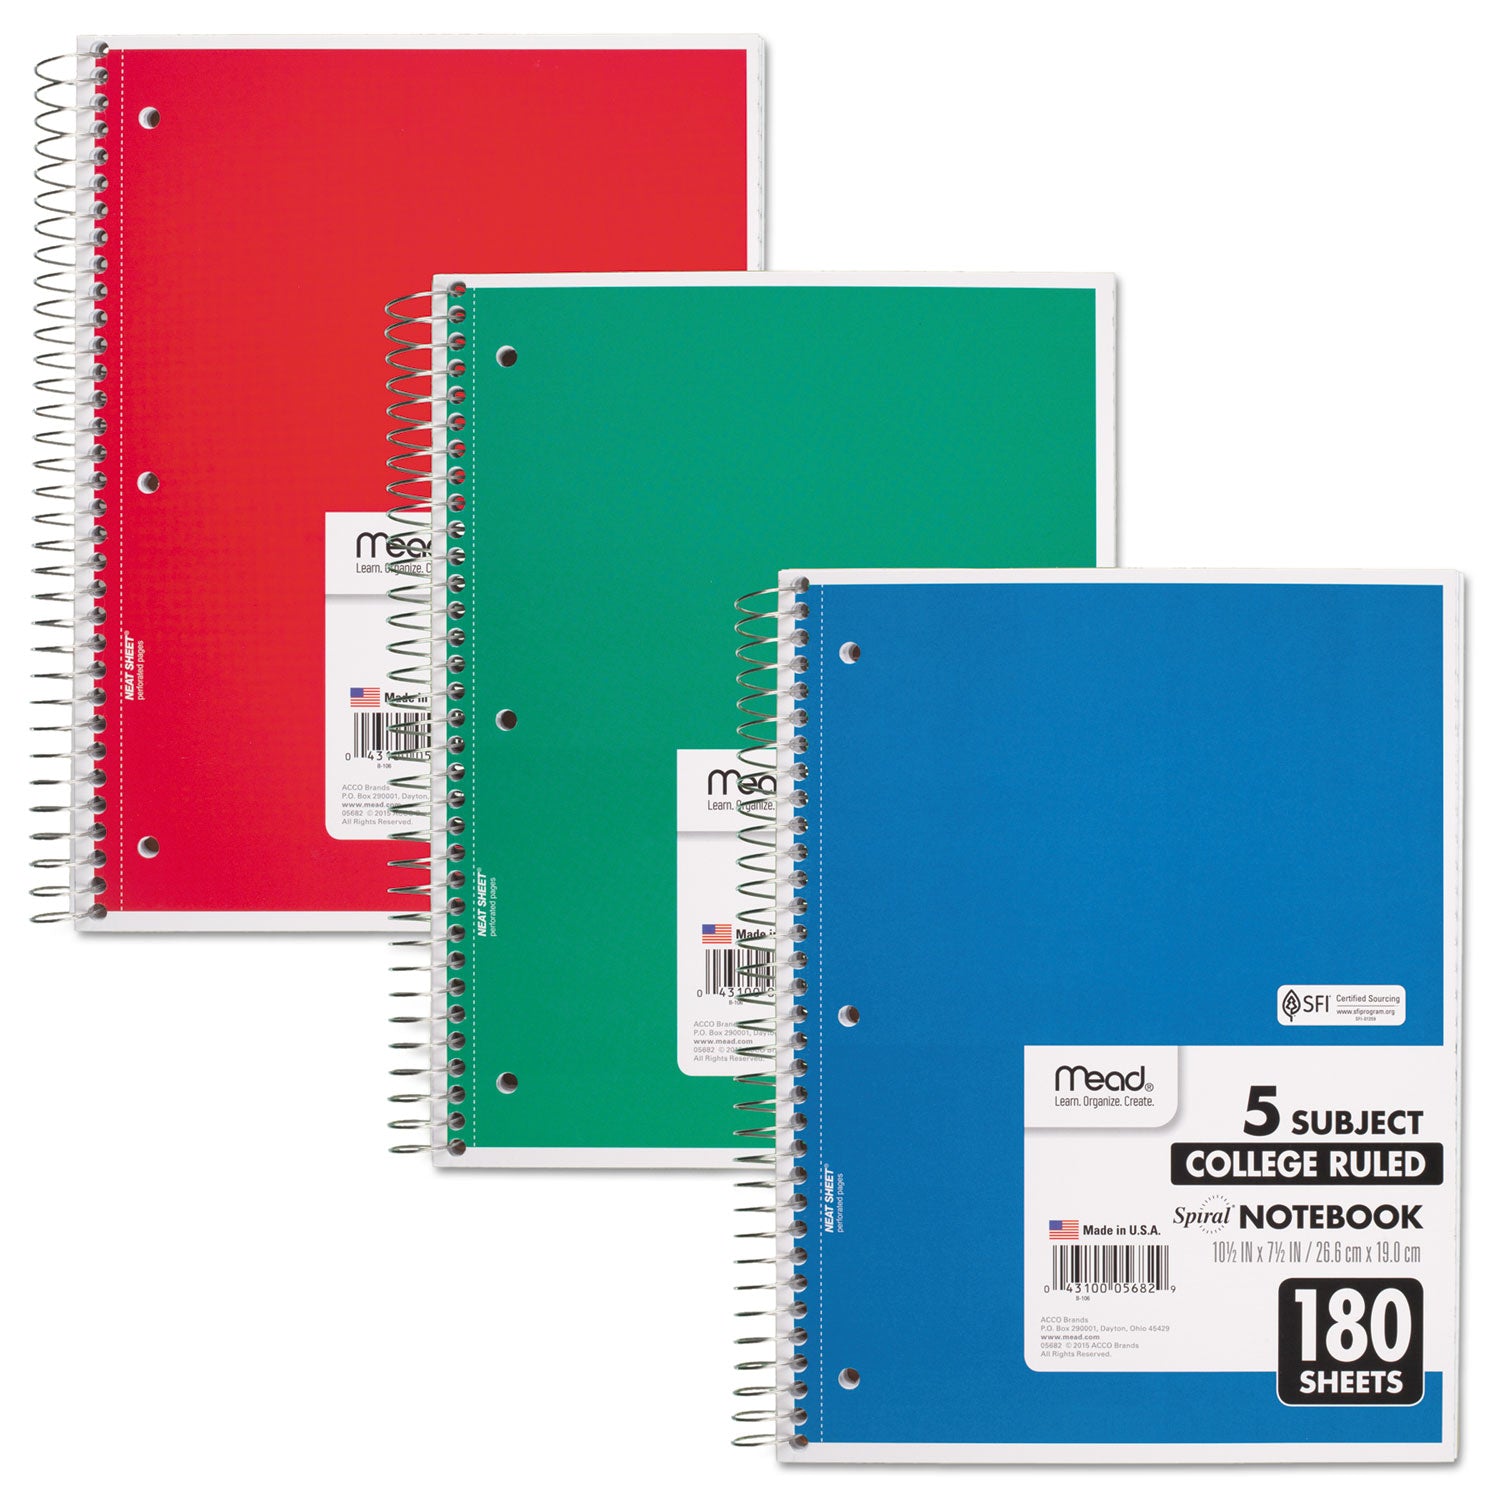 Spiral Notebook, 5-Subject, Medium/College Rule, Randomly Assorted Cover Color, (180) 10.5 x 8 Sheets - 